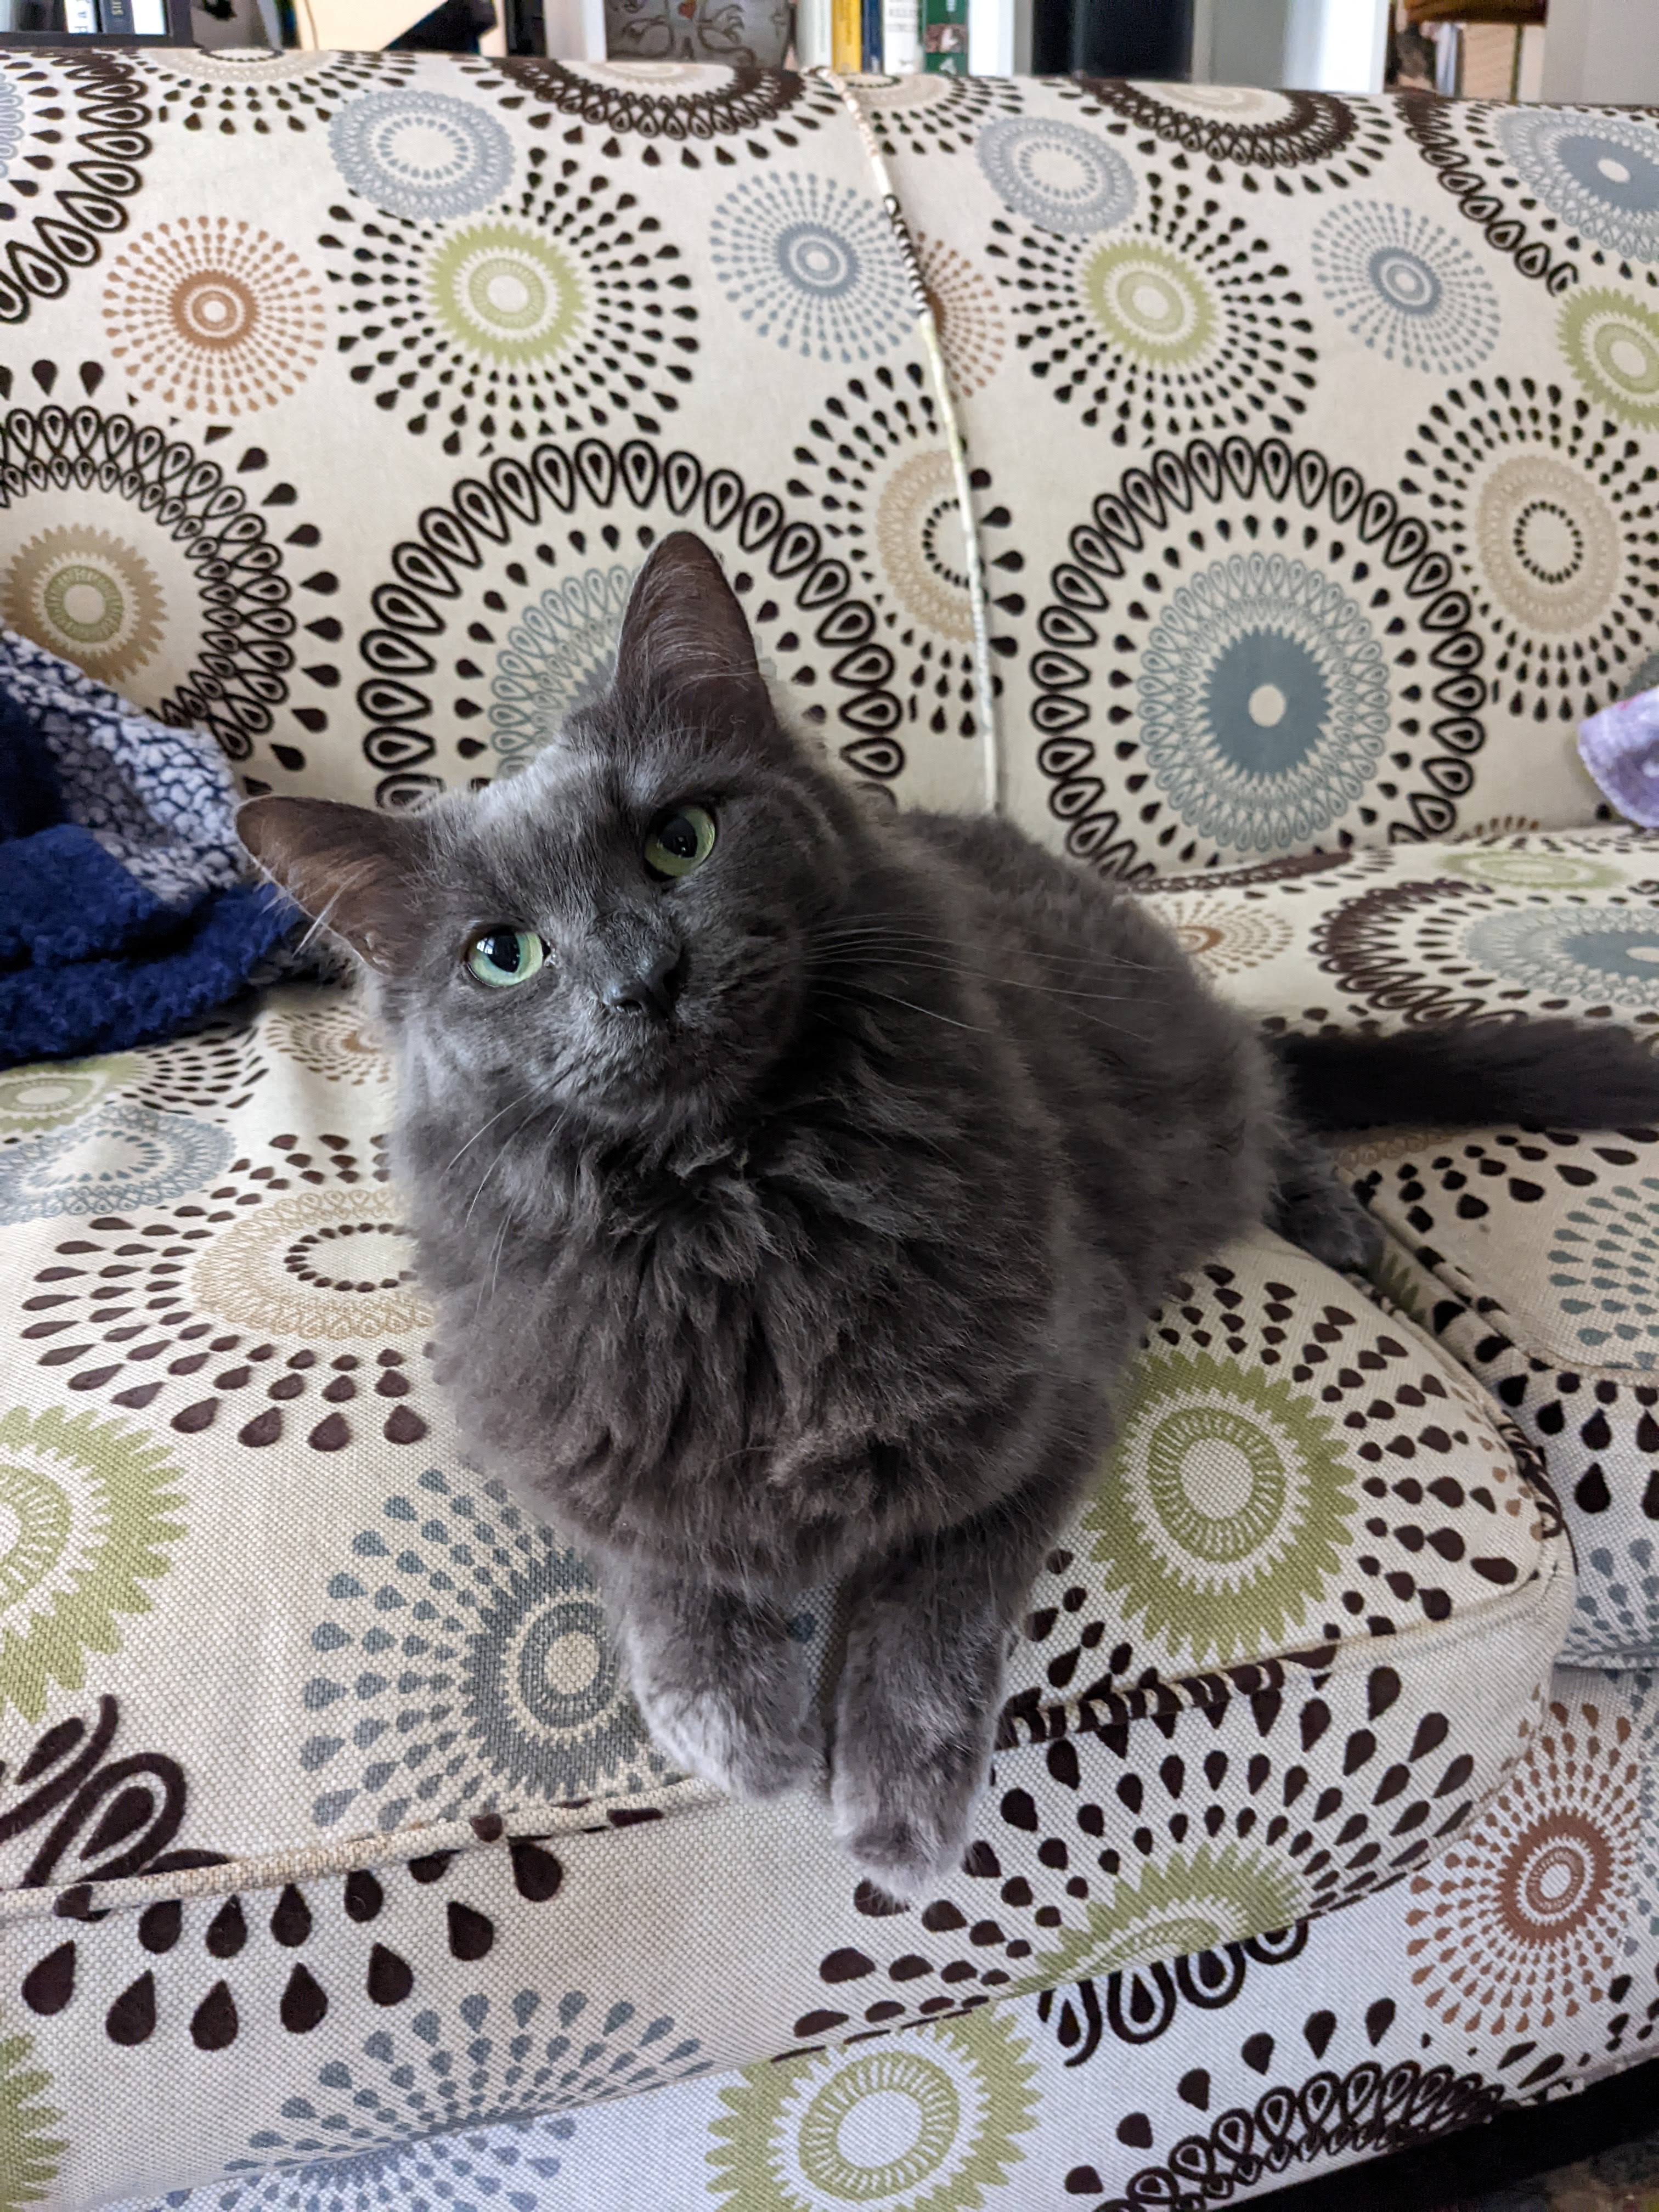 Agnes is a fluffy gray cat